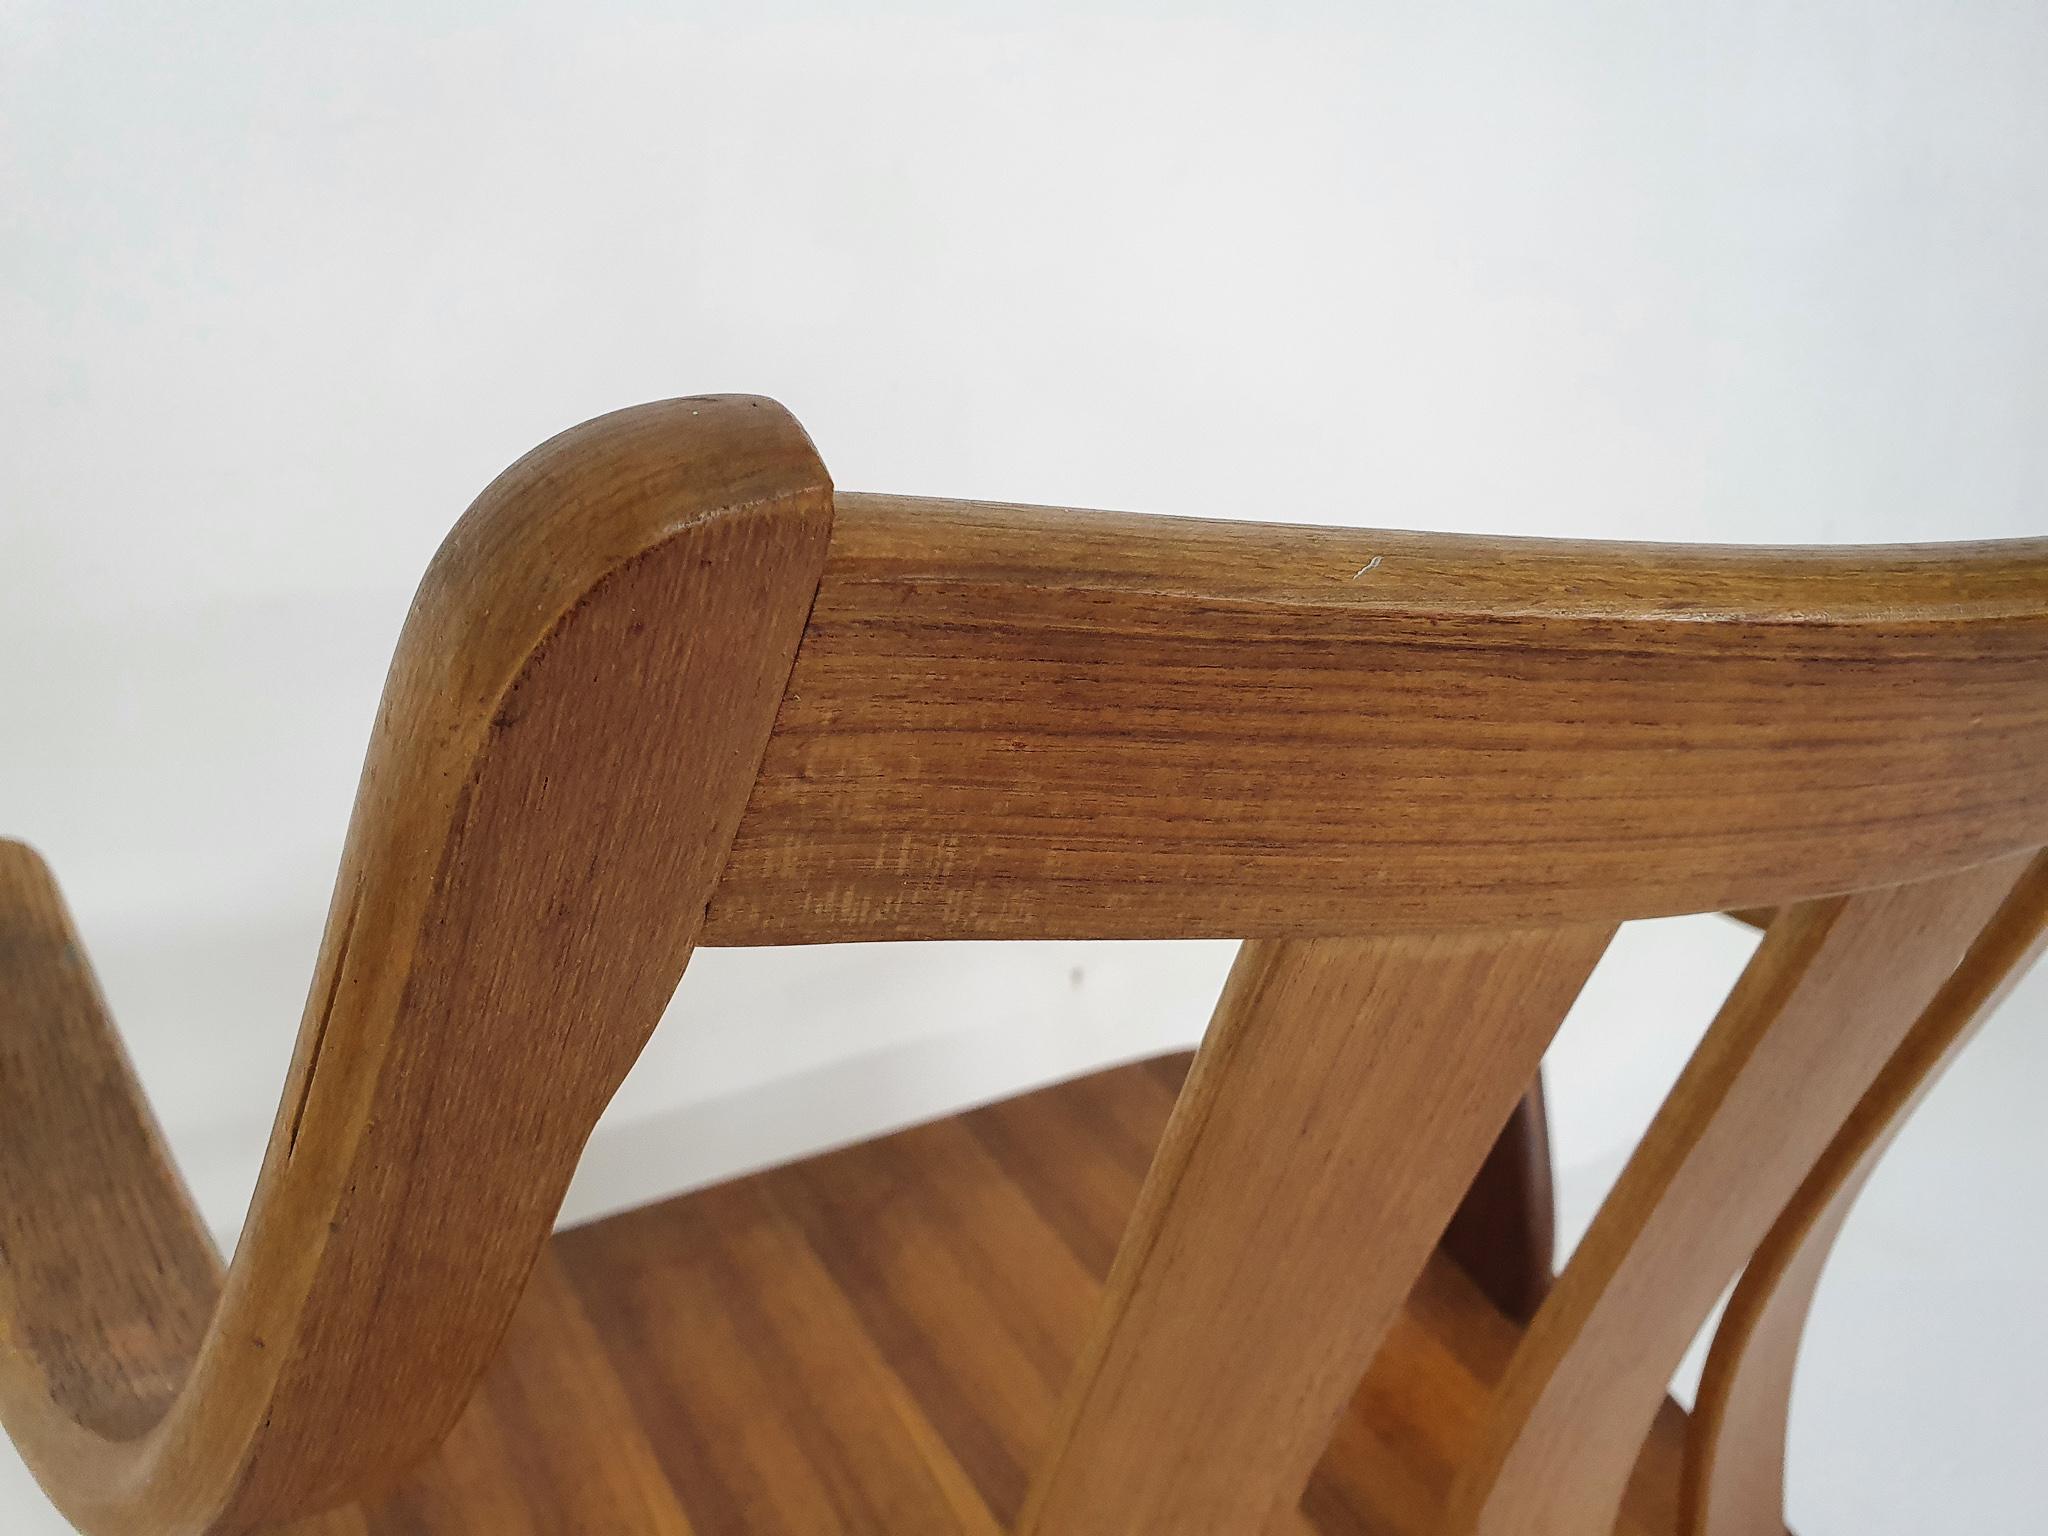 Set of Two Teak Arm Chairs, the Netherlands 1960's For Sale 4